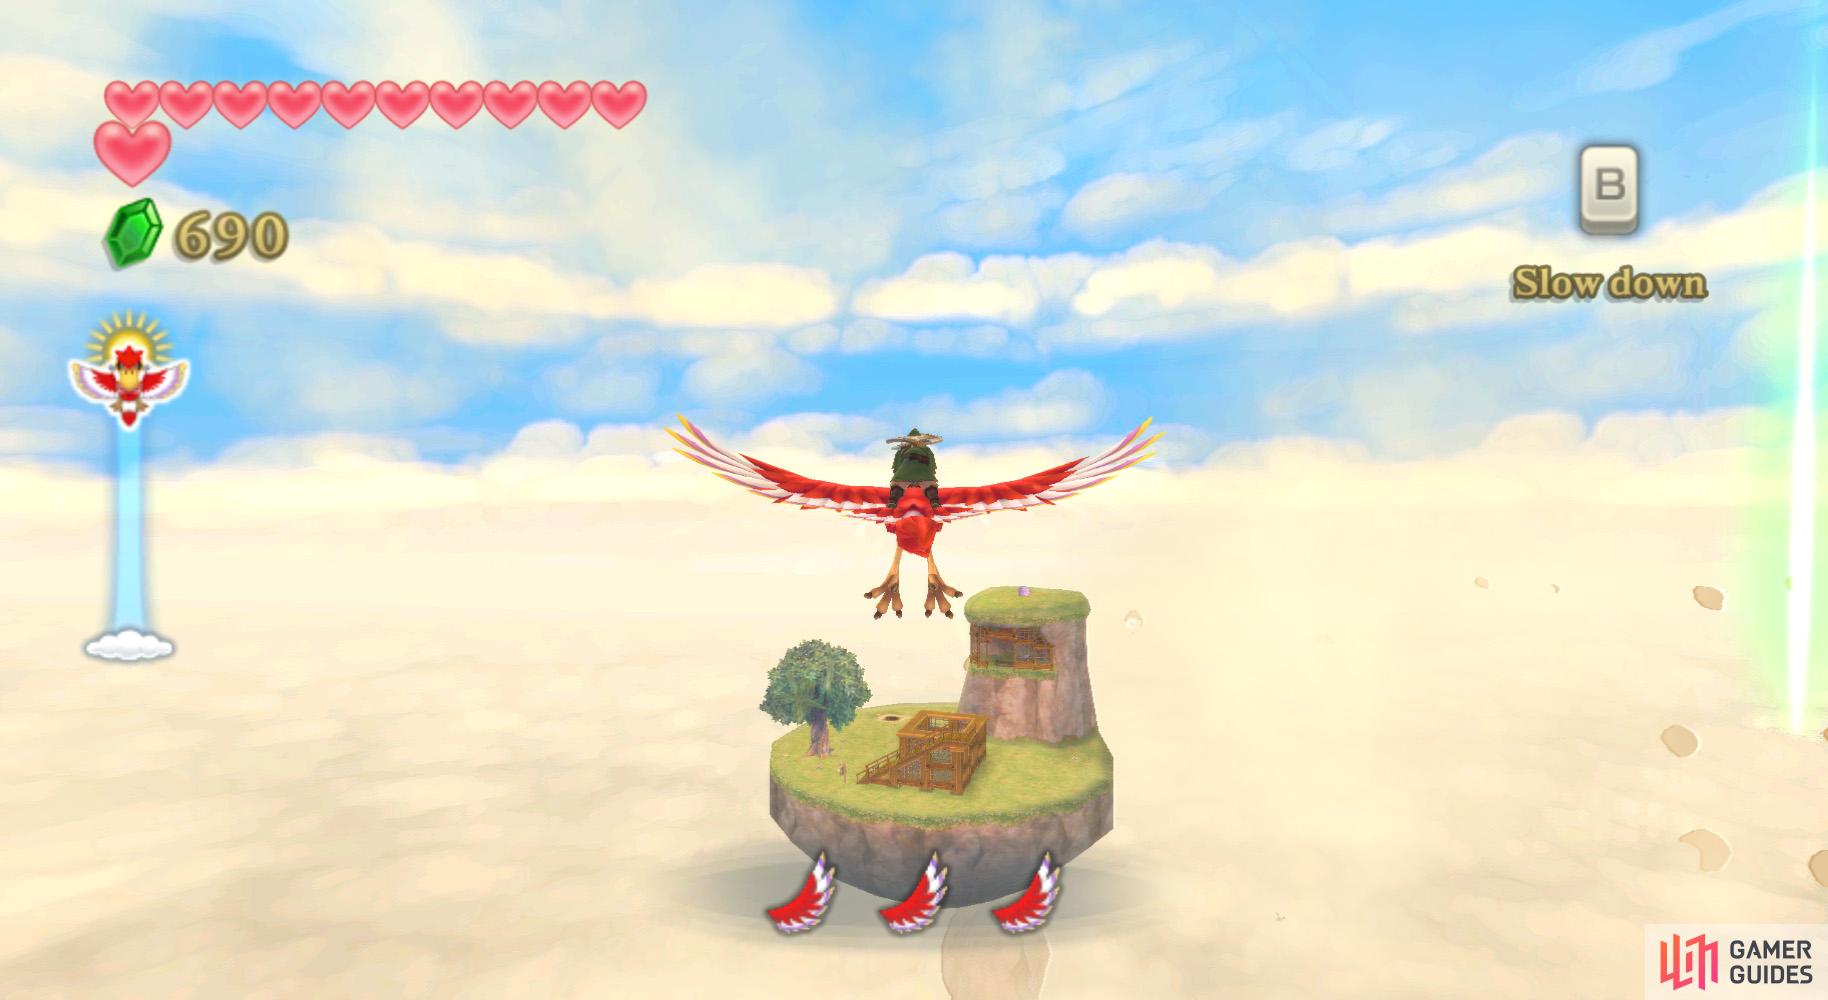 After activating the Temple of Time Goddess Cube, sky-dive to the tallest part of Beedles Island.